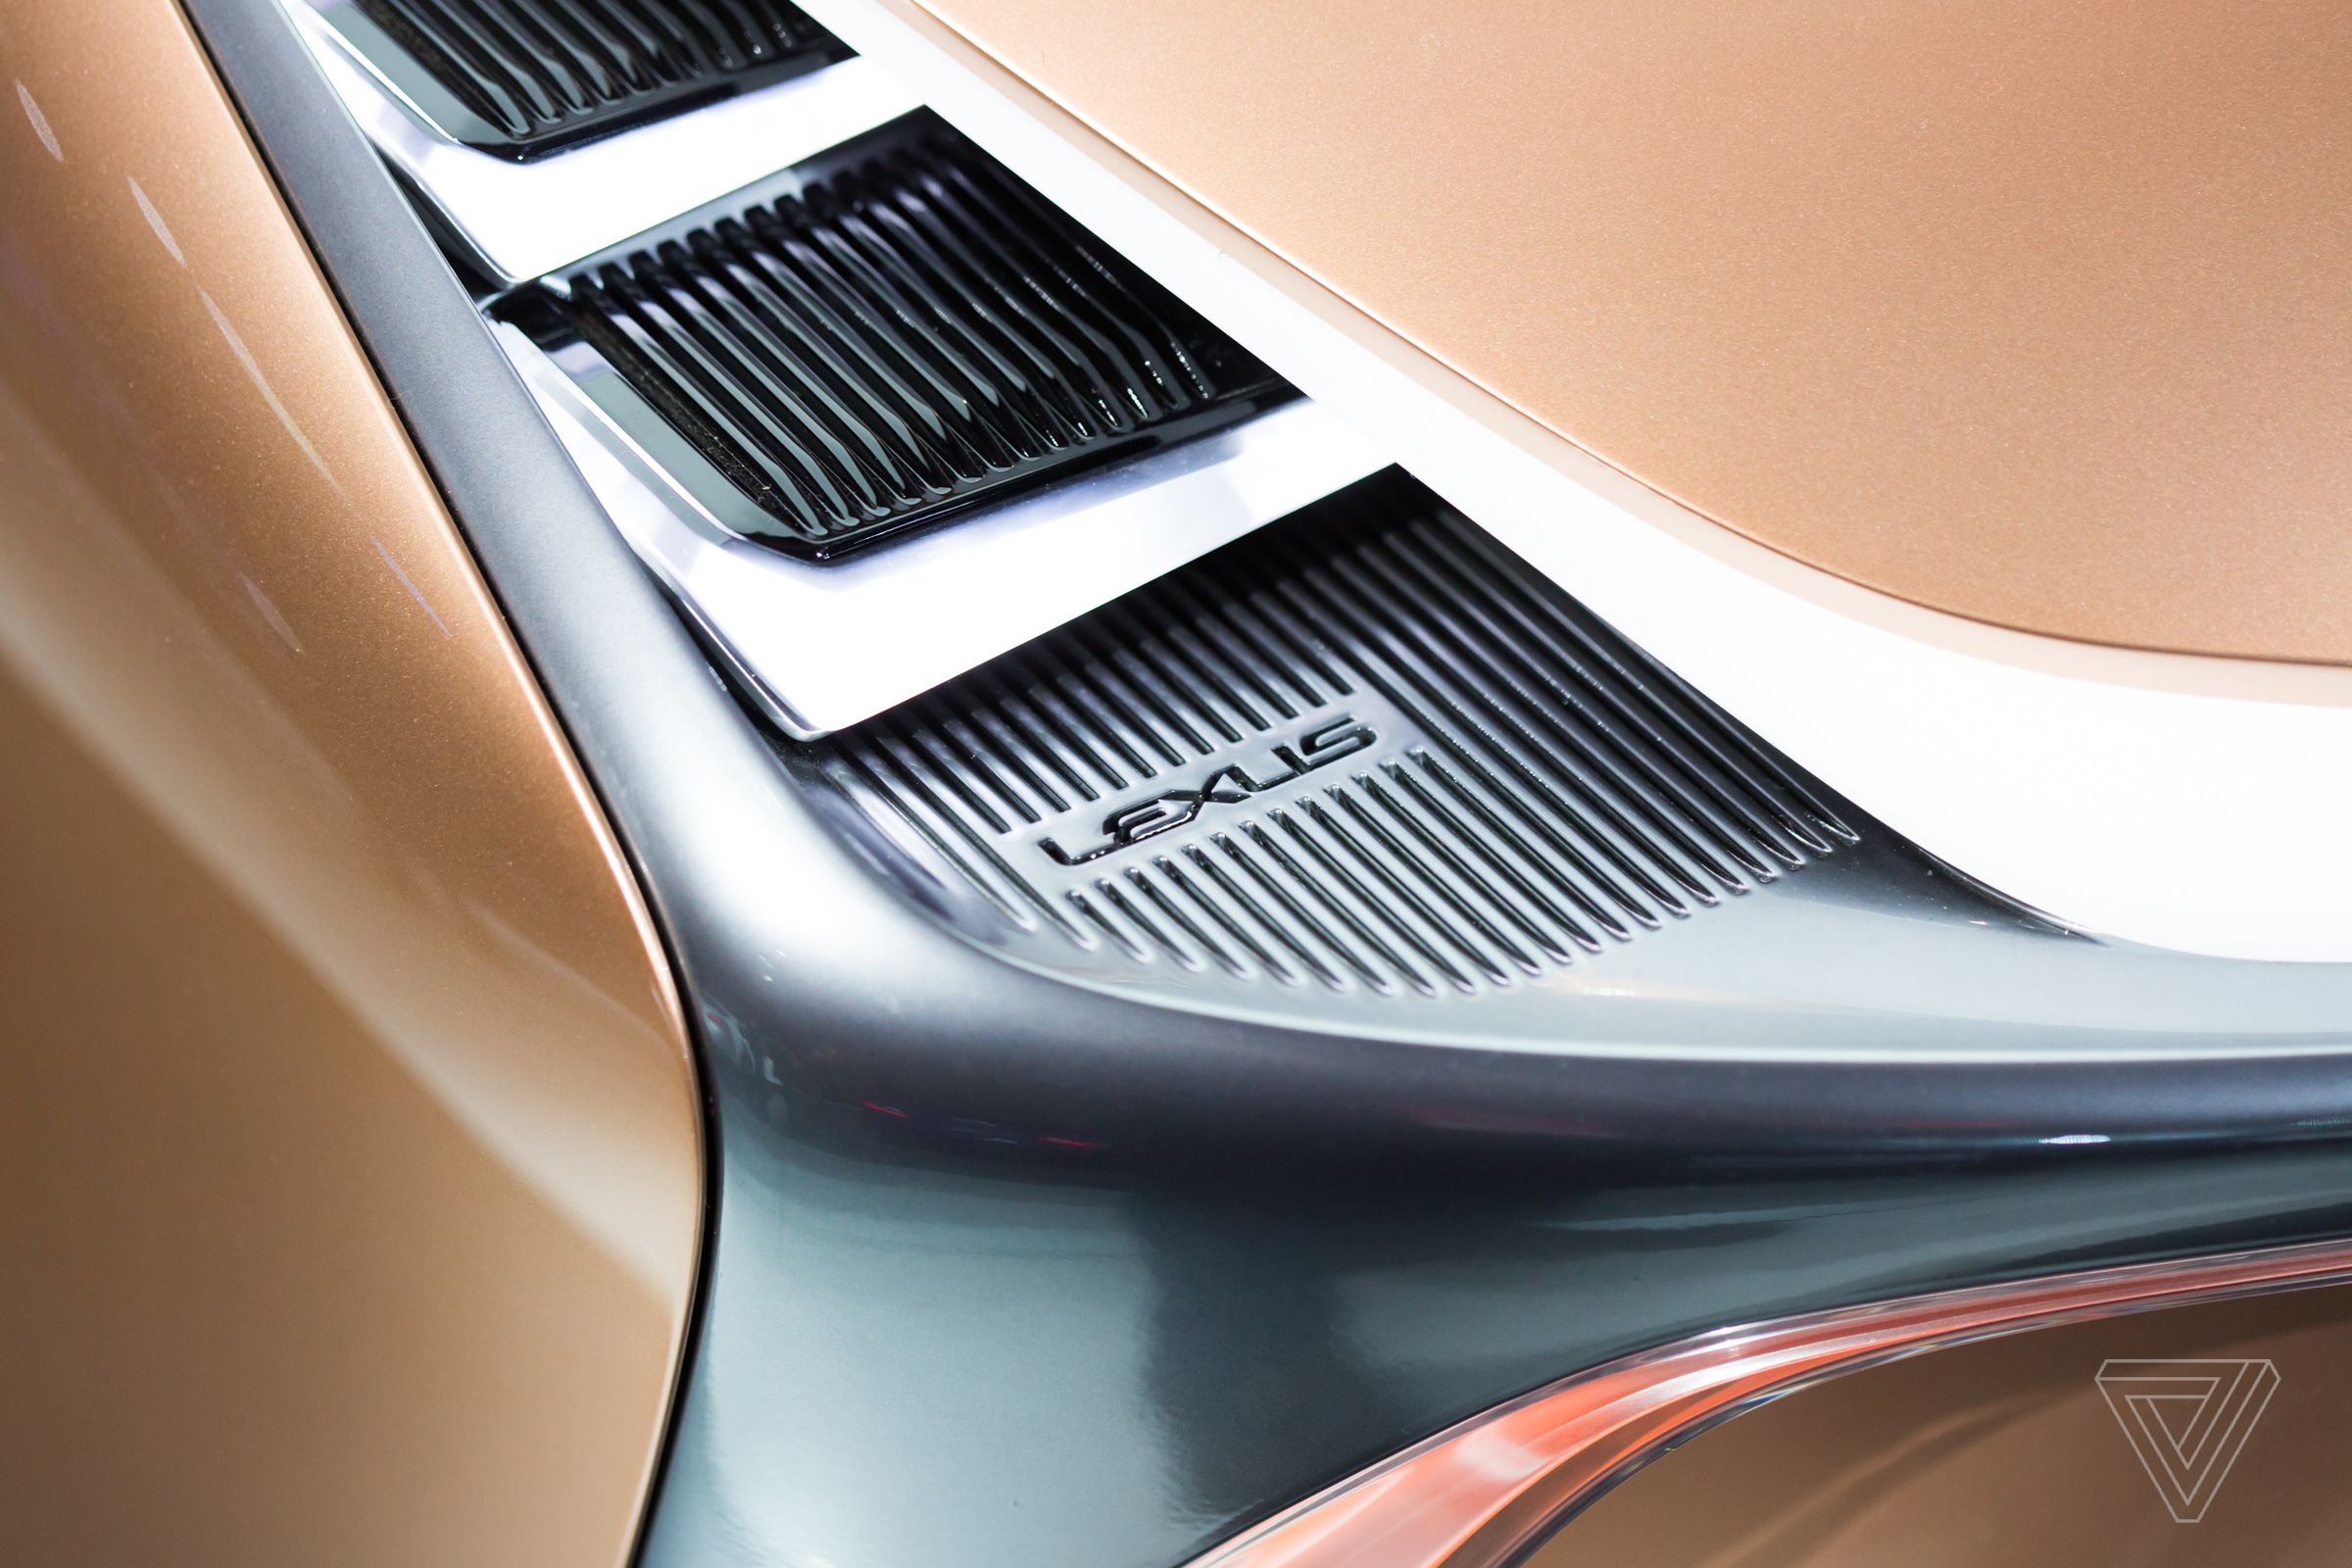 Headlight details on the new Lexus LF-1 Limitless concept. See more photos here.